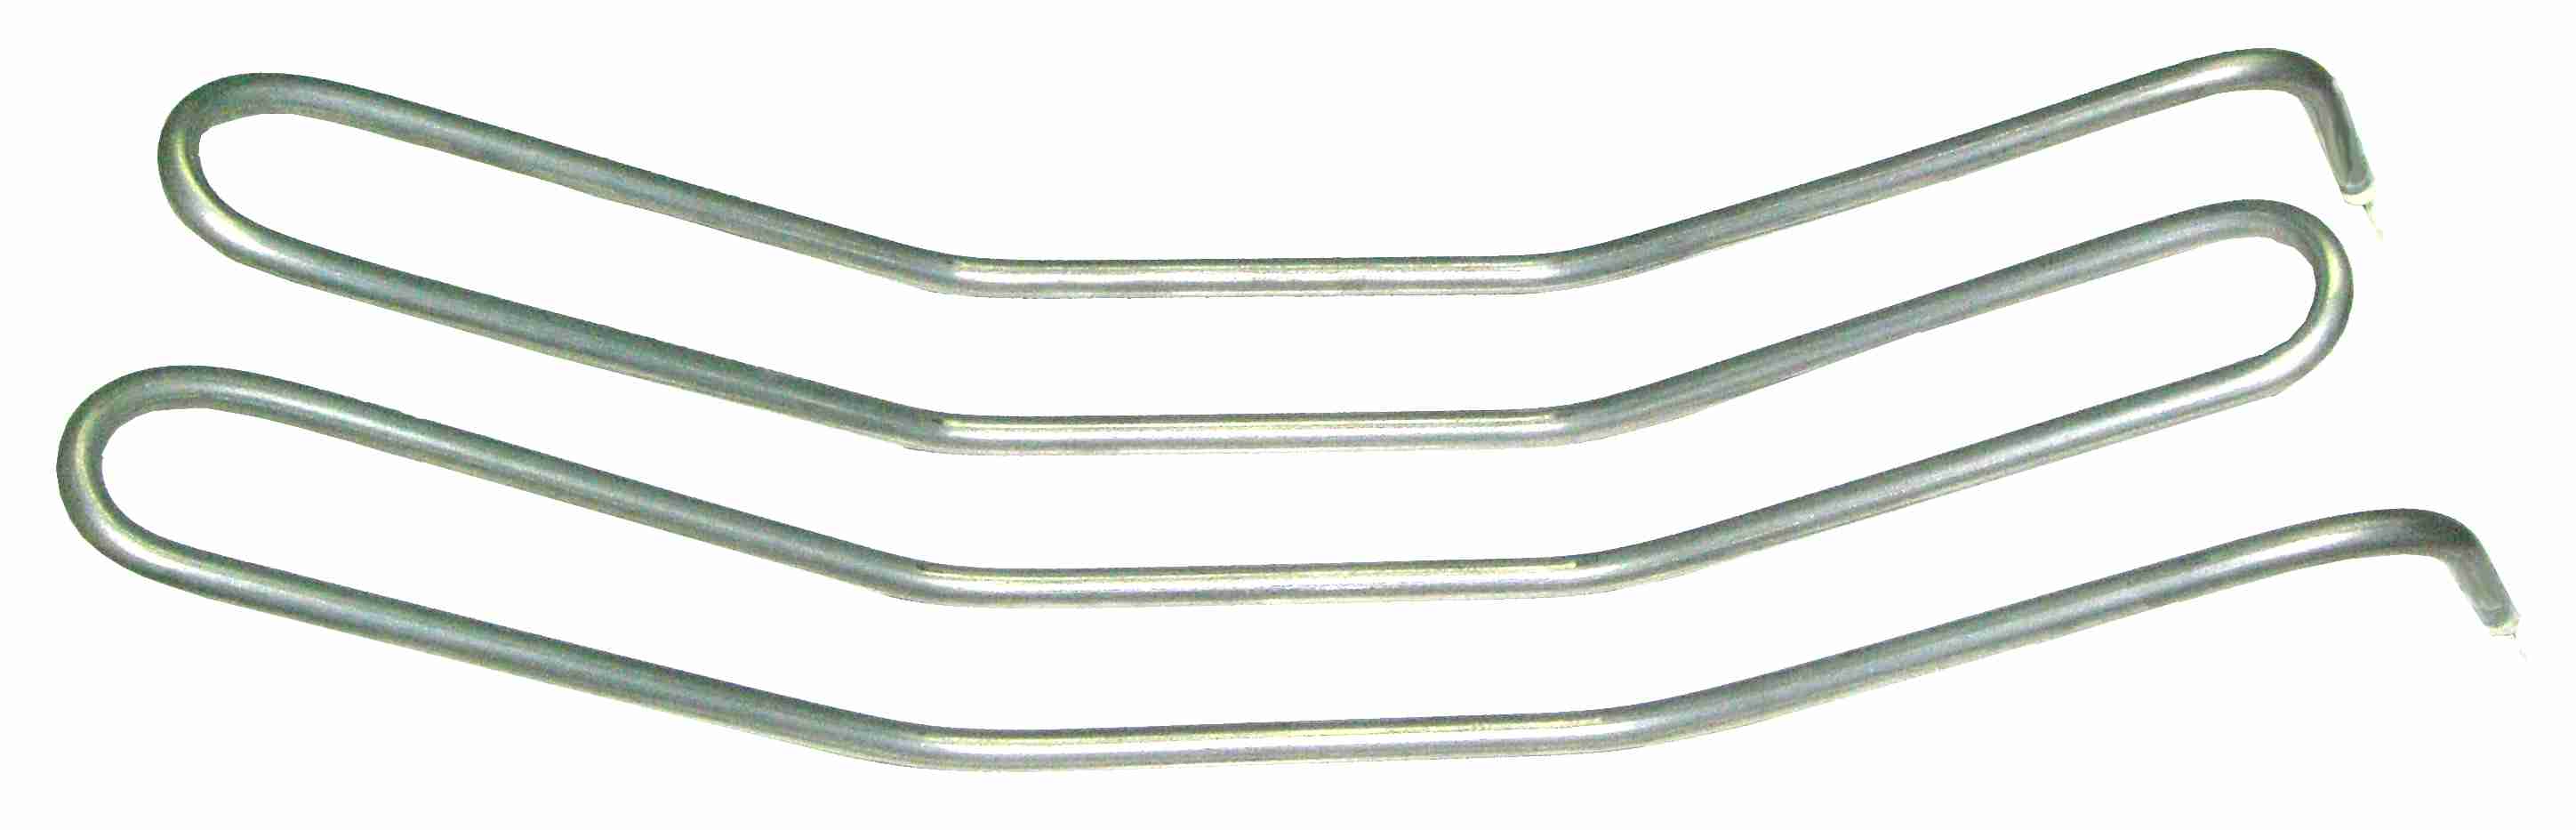 Heating Element for Gyros Grill